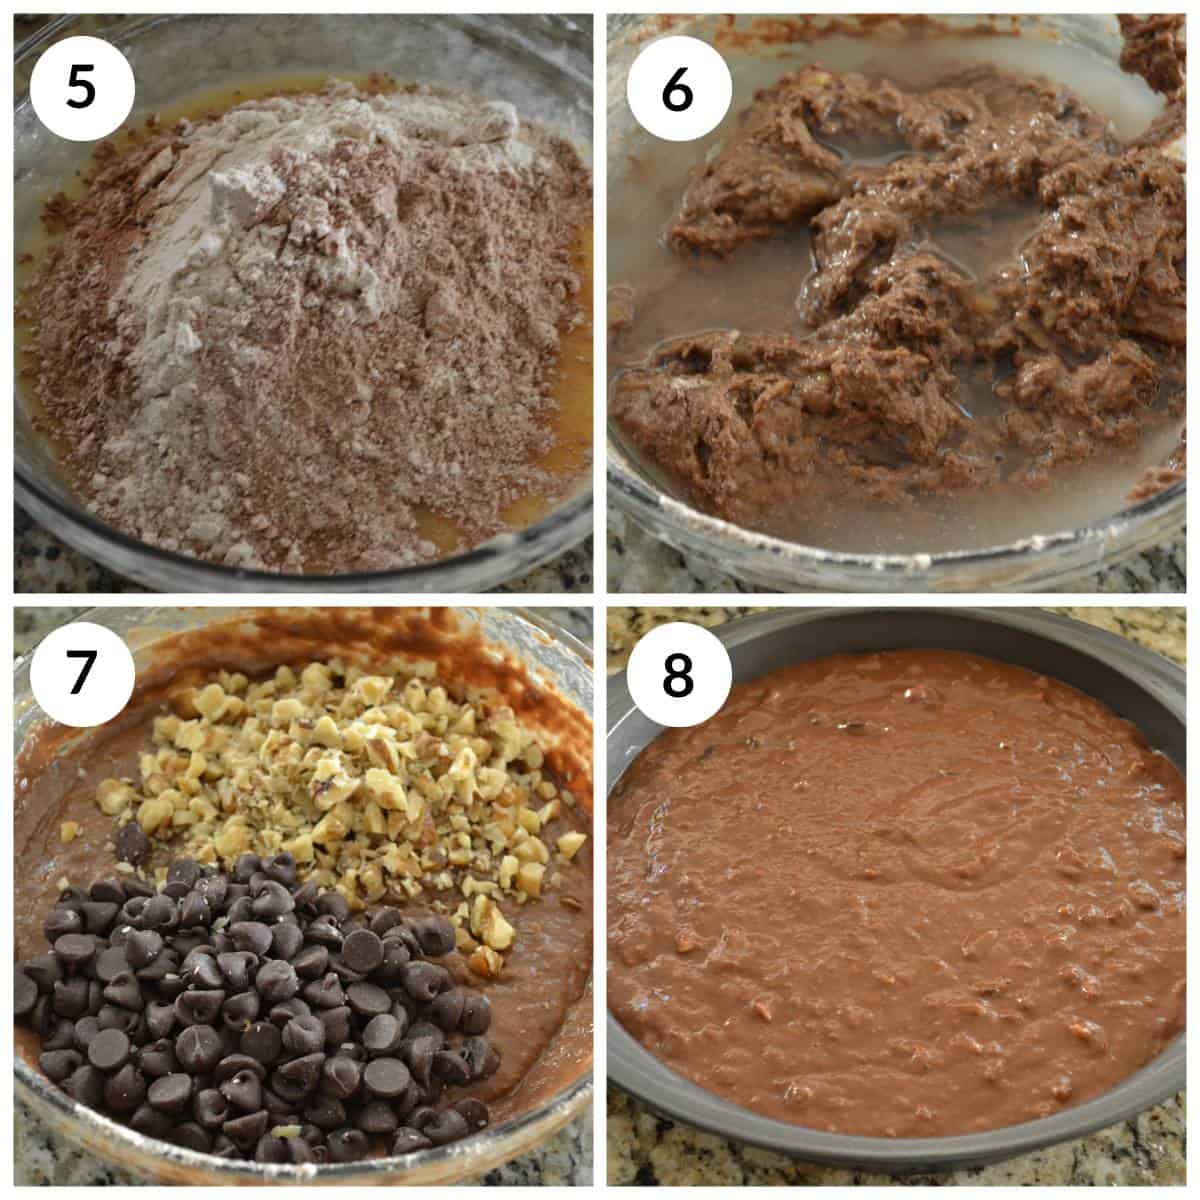 Steps for mixing the dry and we ingredients for chocolate banana cake